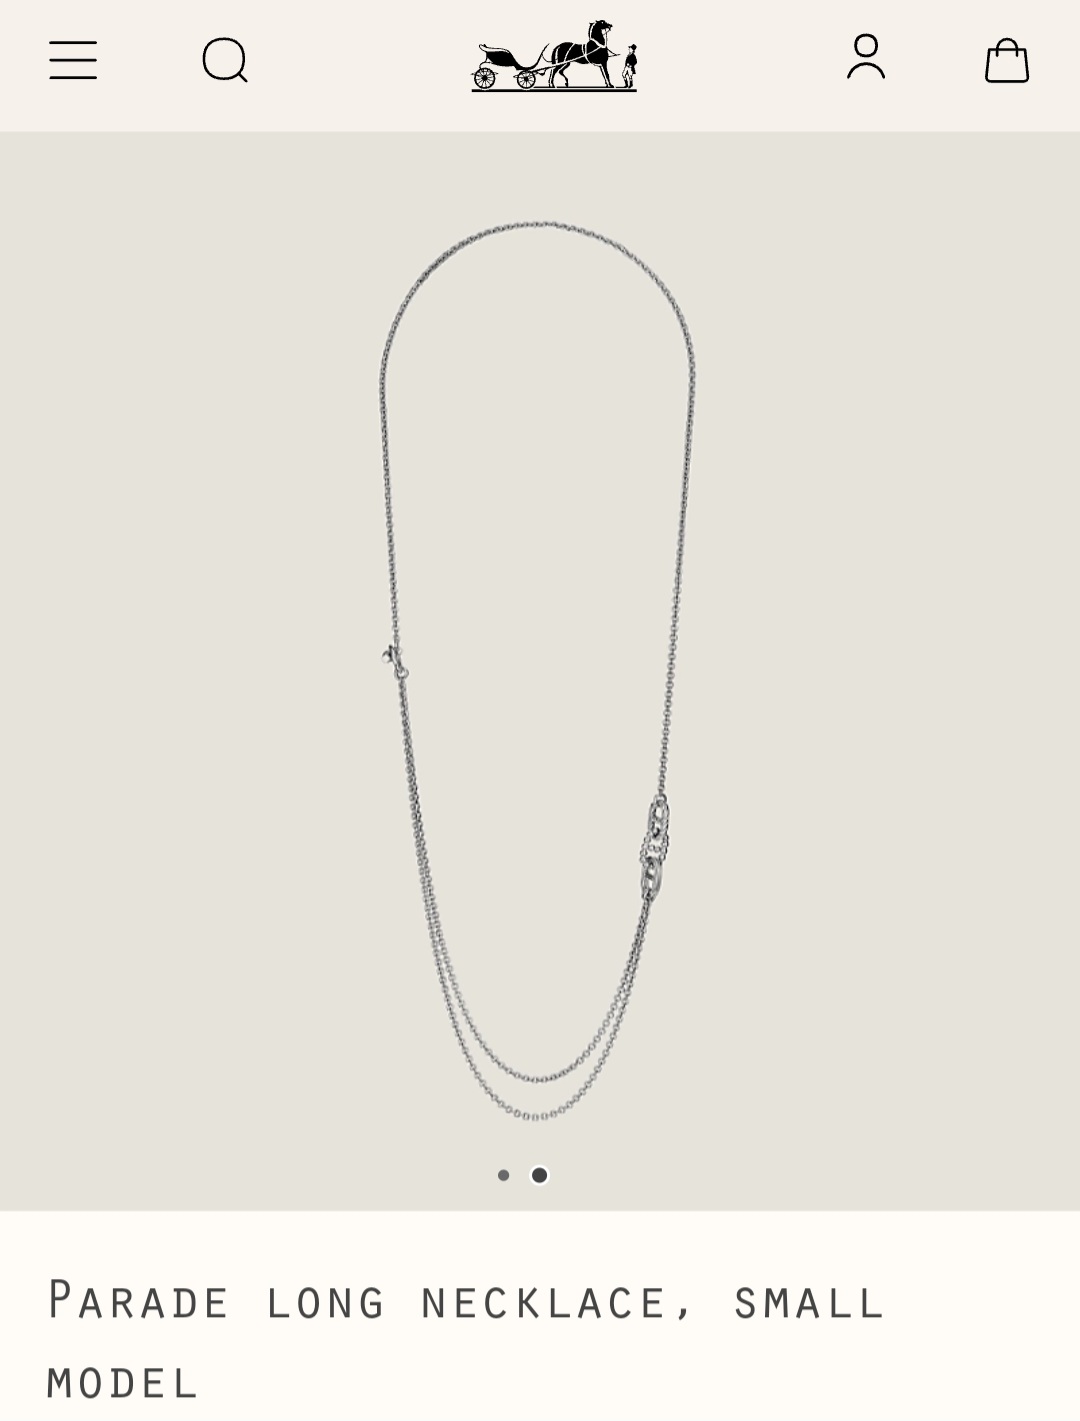 Hermes Parade long necklace